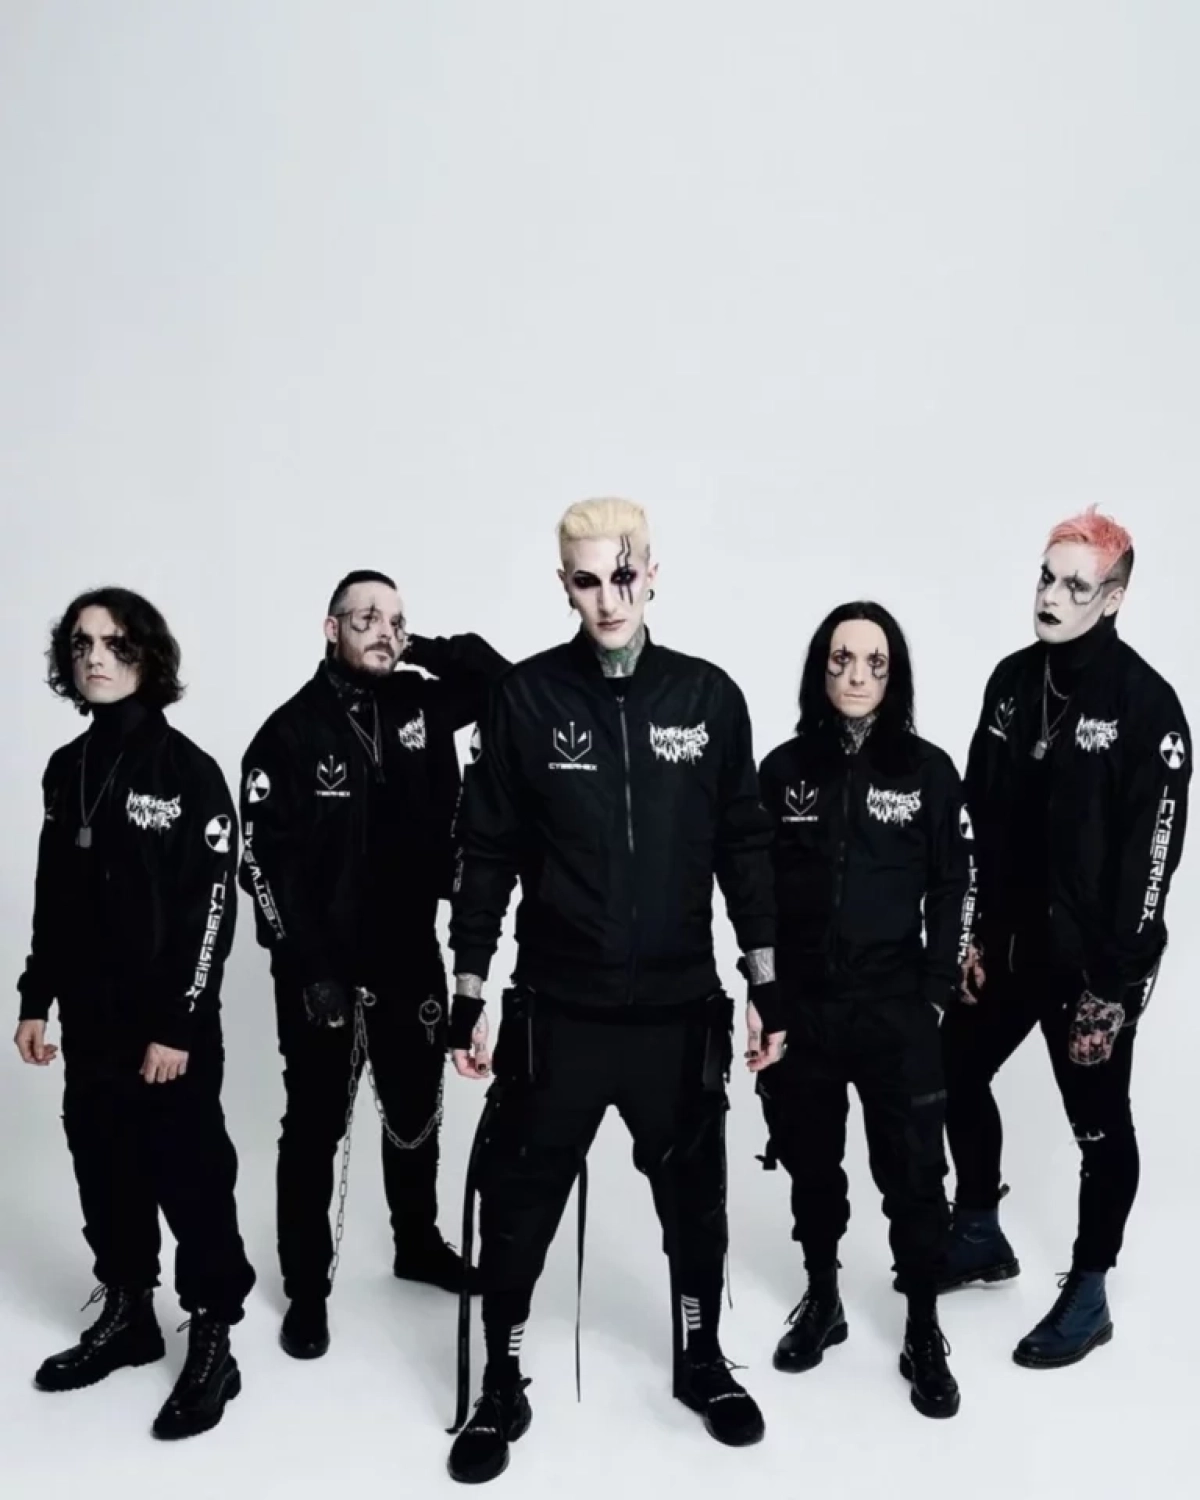 Motionless In White at Komplex 457 Tickets